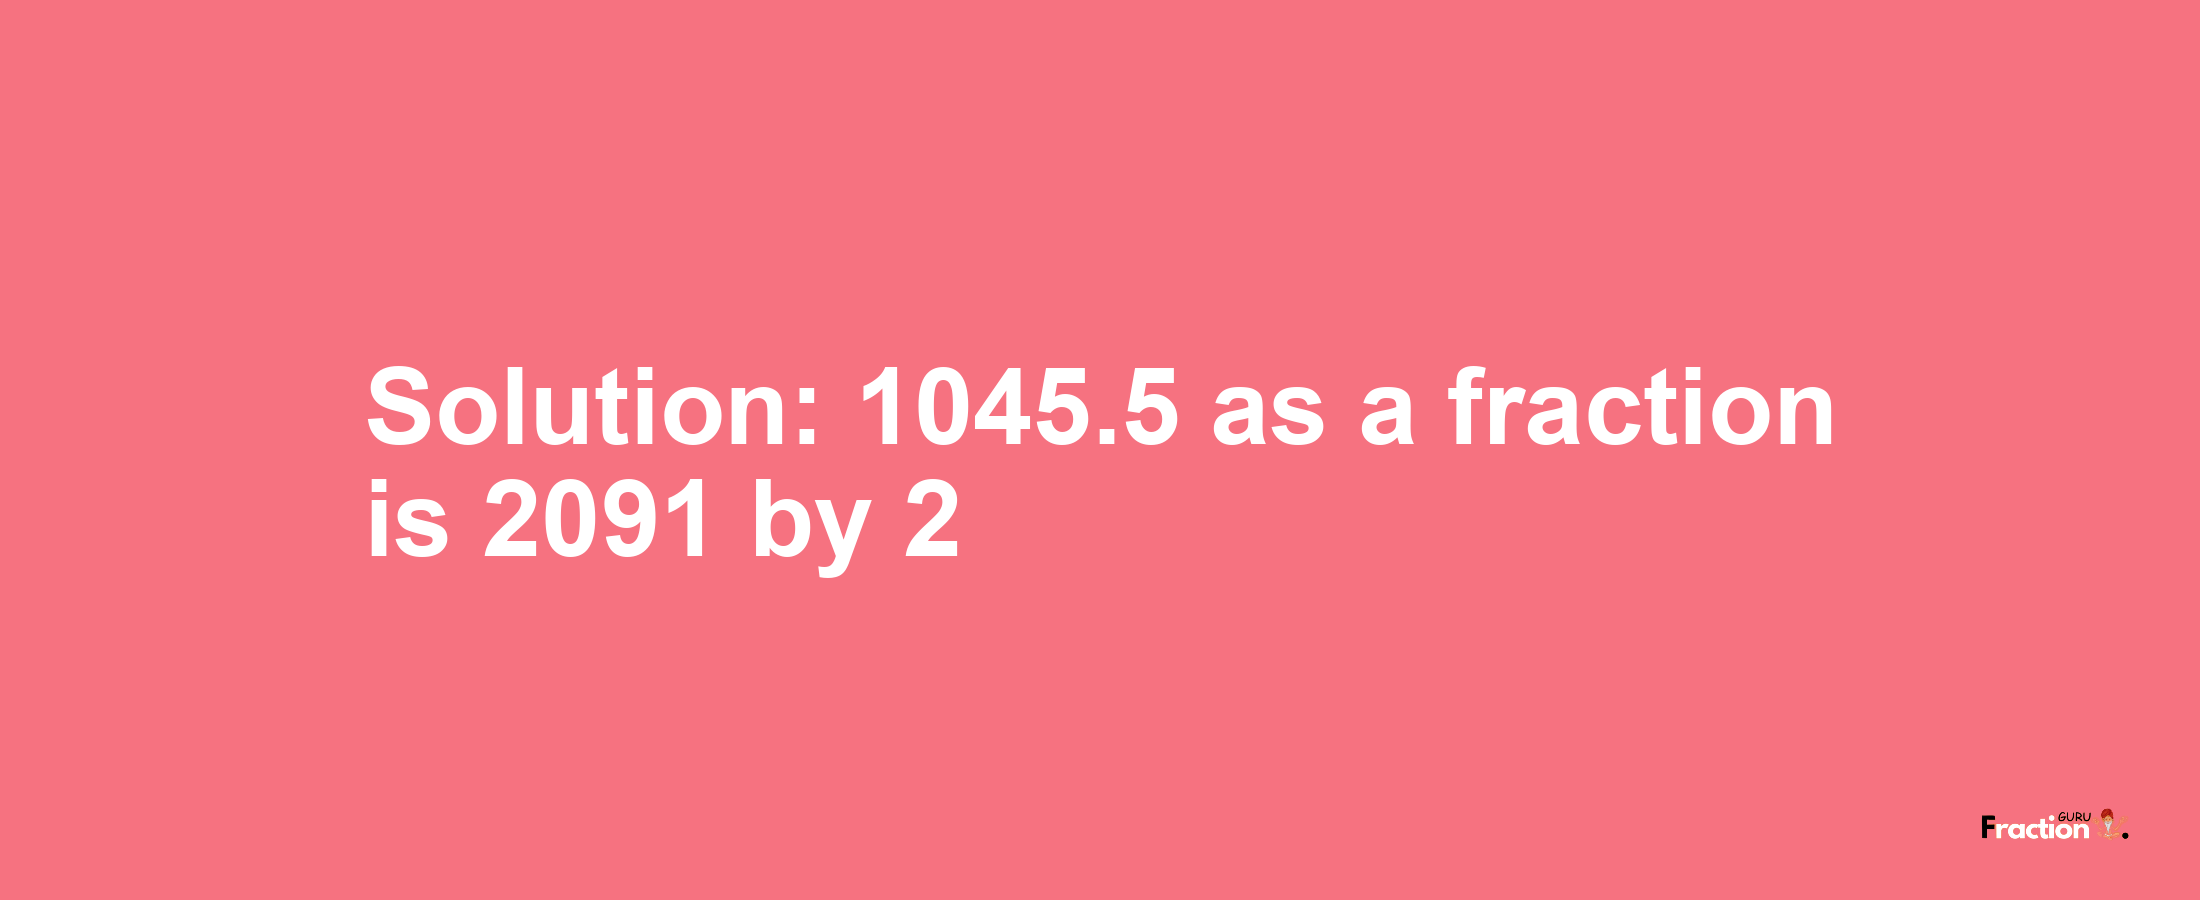 Solution:1045.5 as a fraction is 2091/2